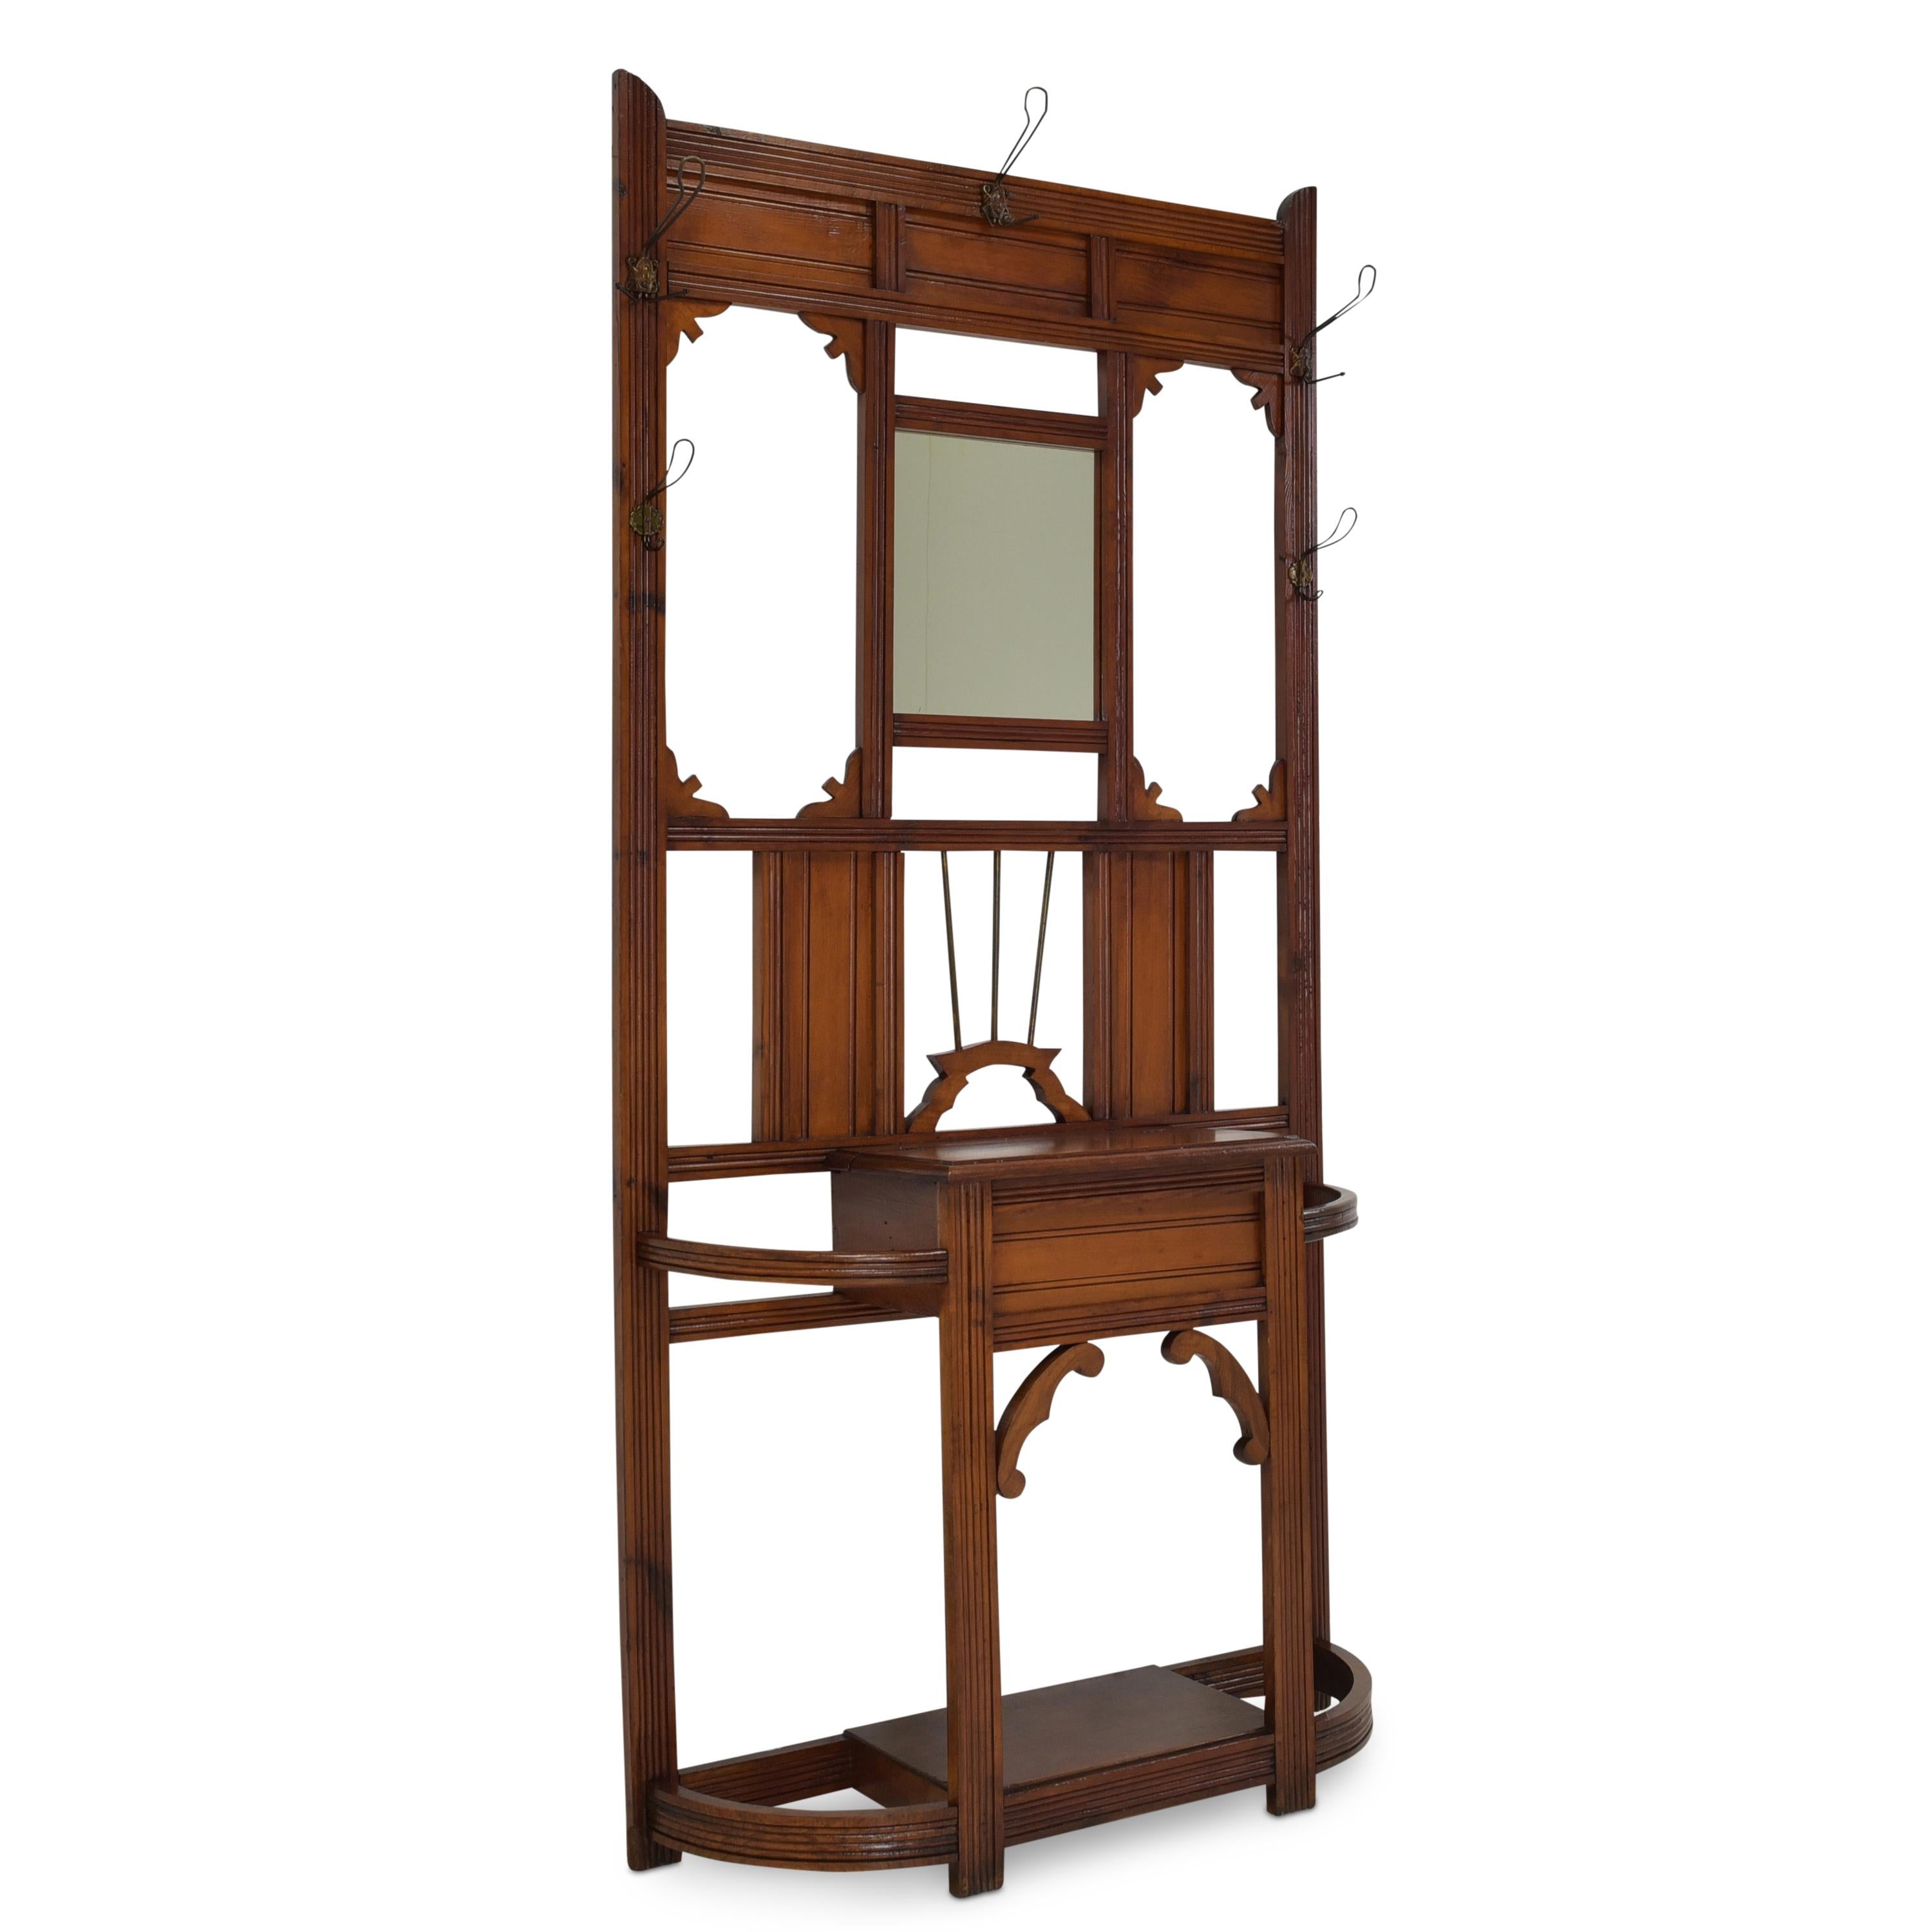 Wardrobe restored Art Nouveau / Art Deco around 1925 oak

Features:
Asymmetric model with mirror, hook and compartment with drawer
Beautiful ornaments
Very nice patina

Additional information:
Material: Solid oak and beech
Dimensions: 98.5